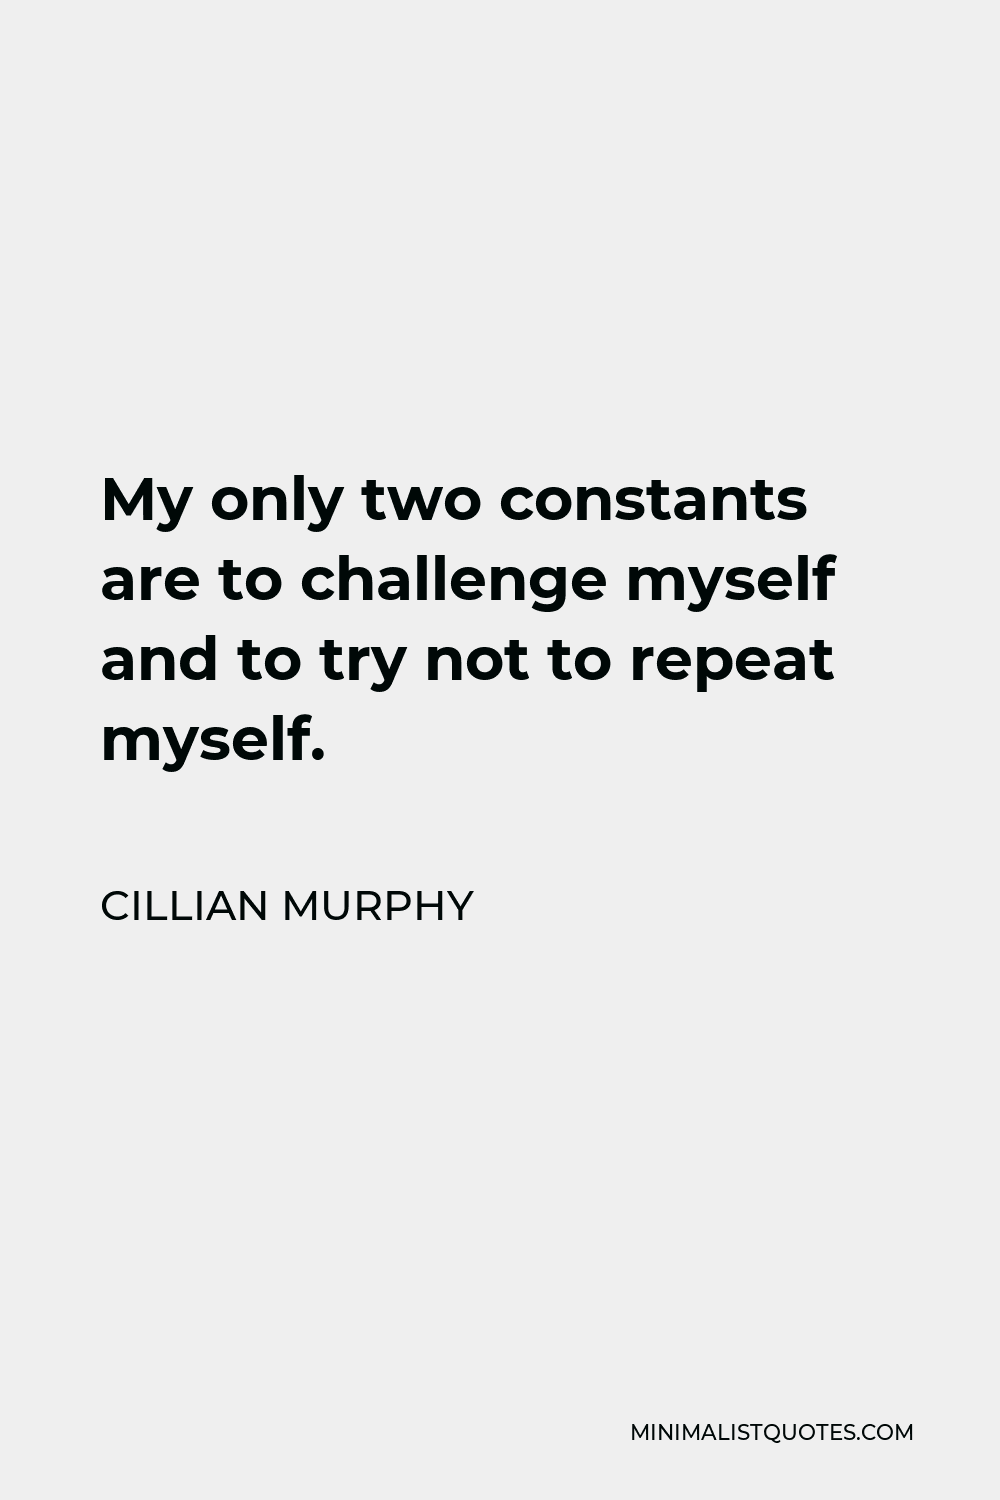 Cillian Murphy Quote - My only two constants are to challenge myself and to try not to repeat myself.